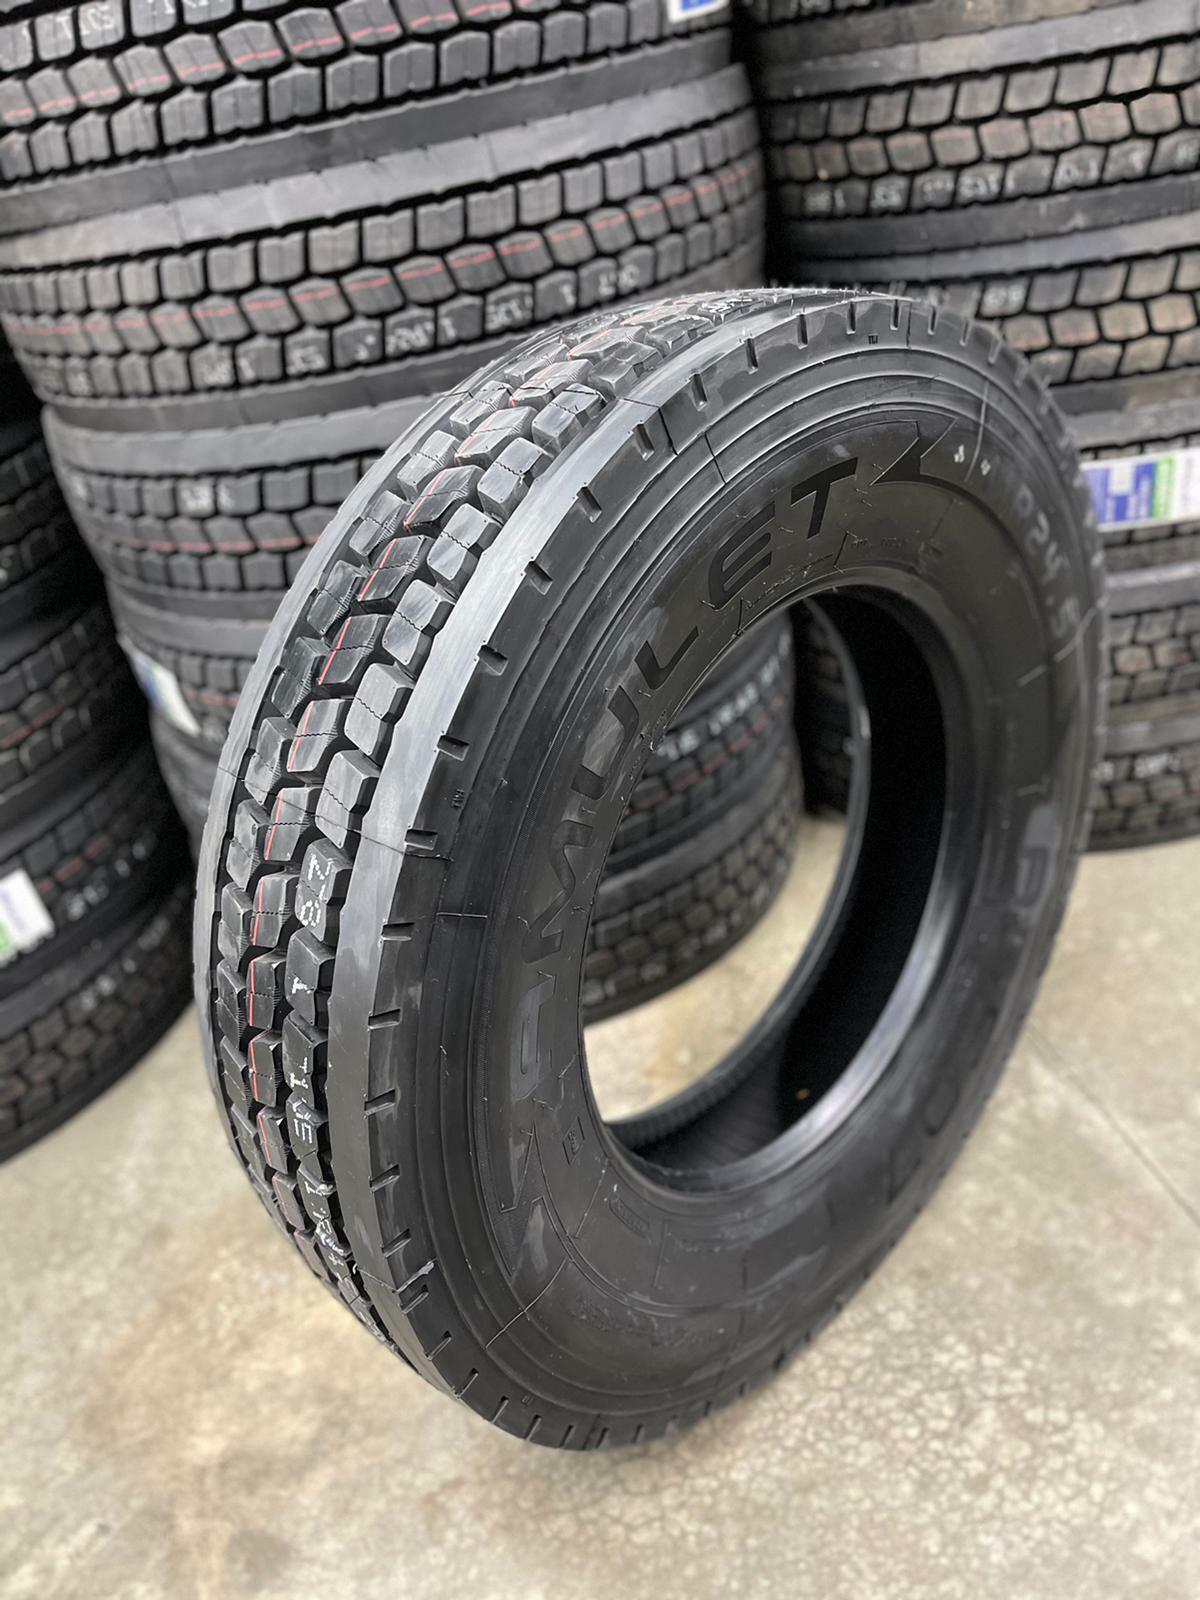 4 Tires 285/75R24.5 Amulet AD507 Drive 16 Ply L 147/144 Commercial Truck